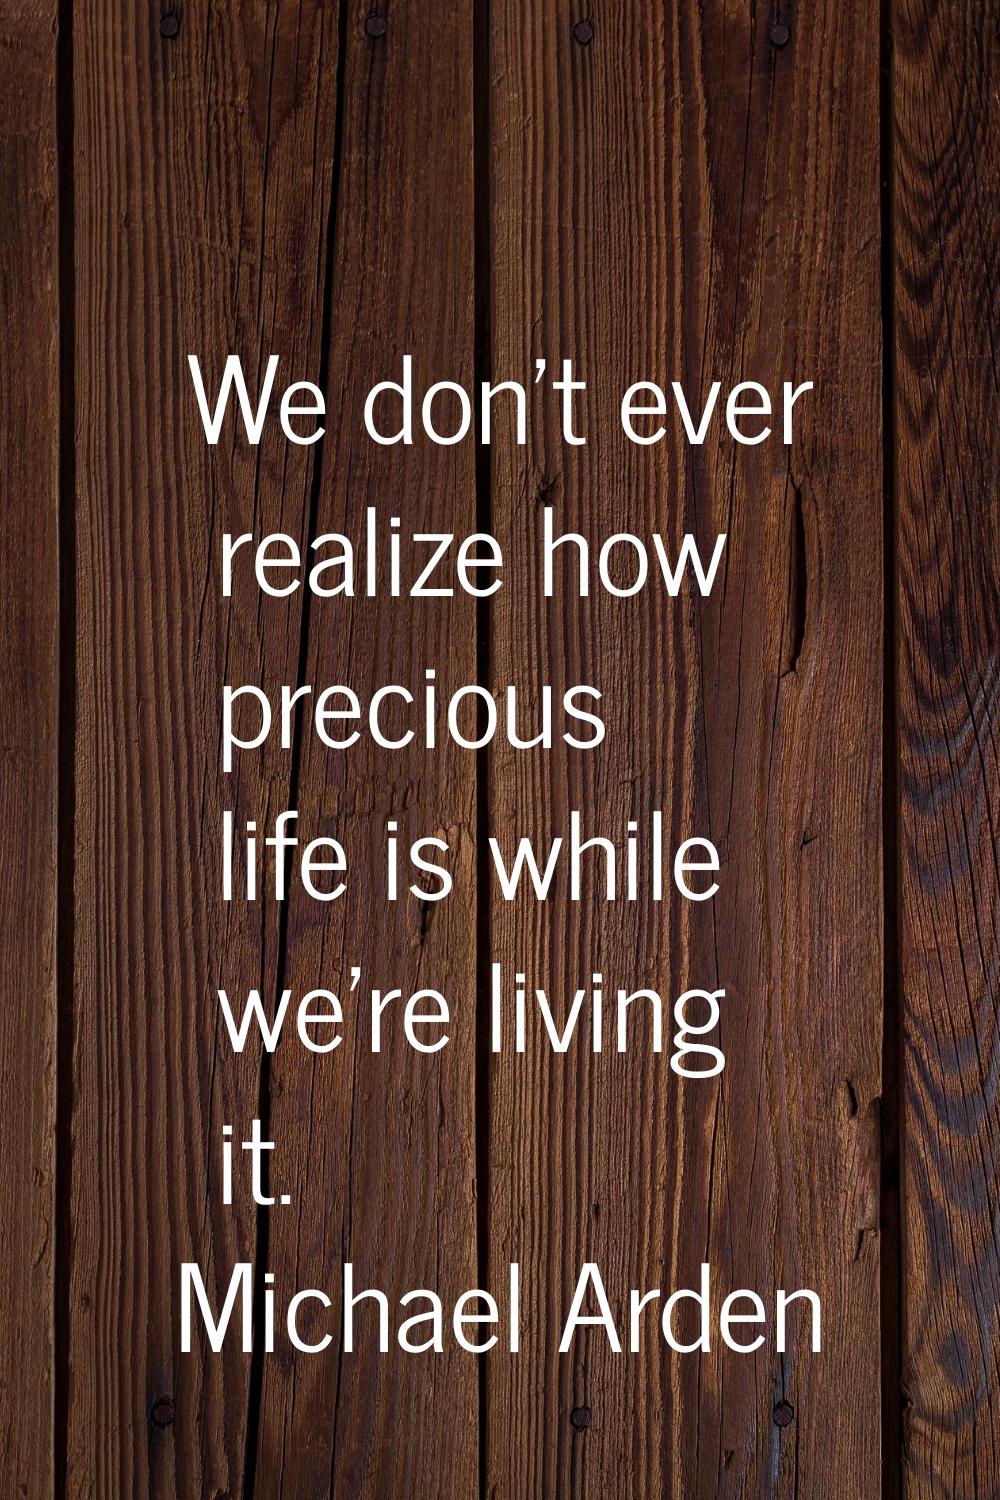 We don't ever realize how precious life is while we're living it.